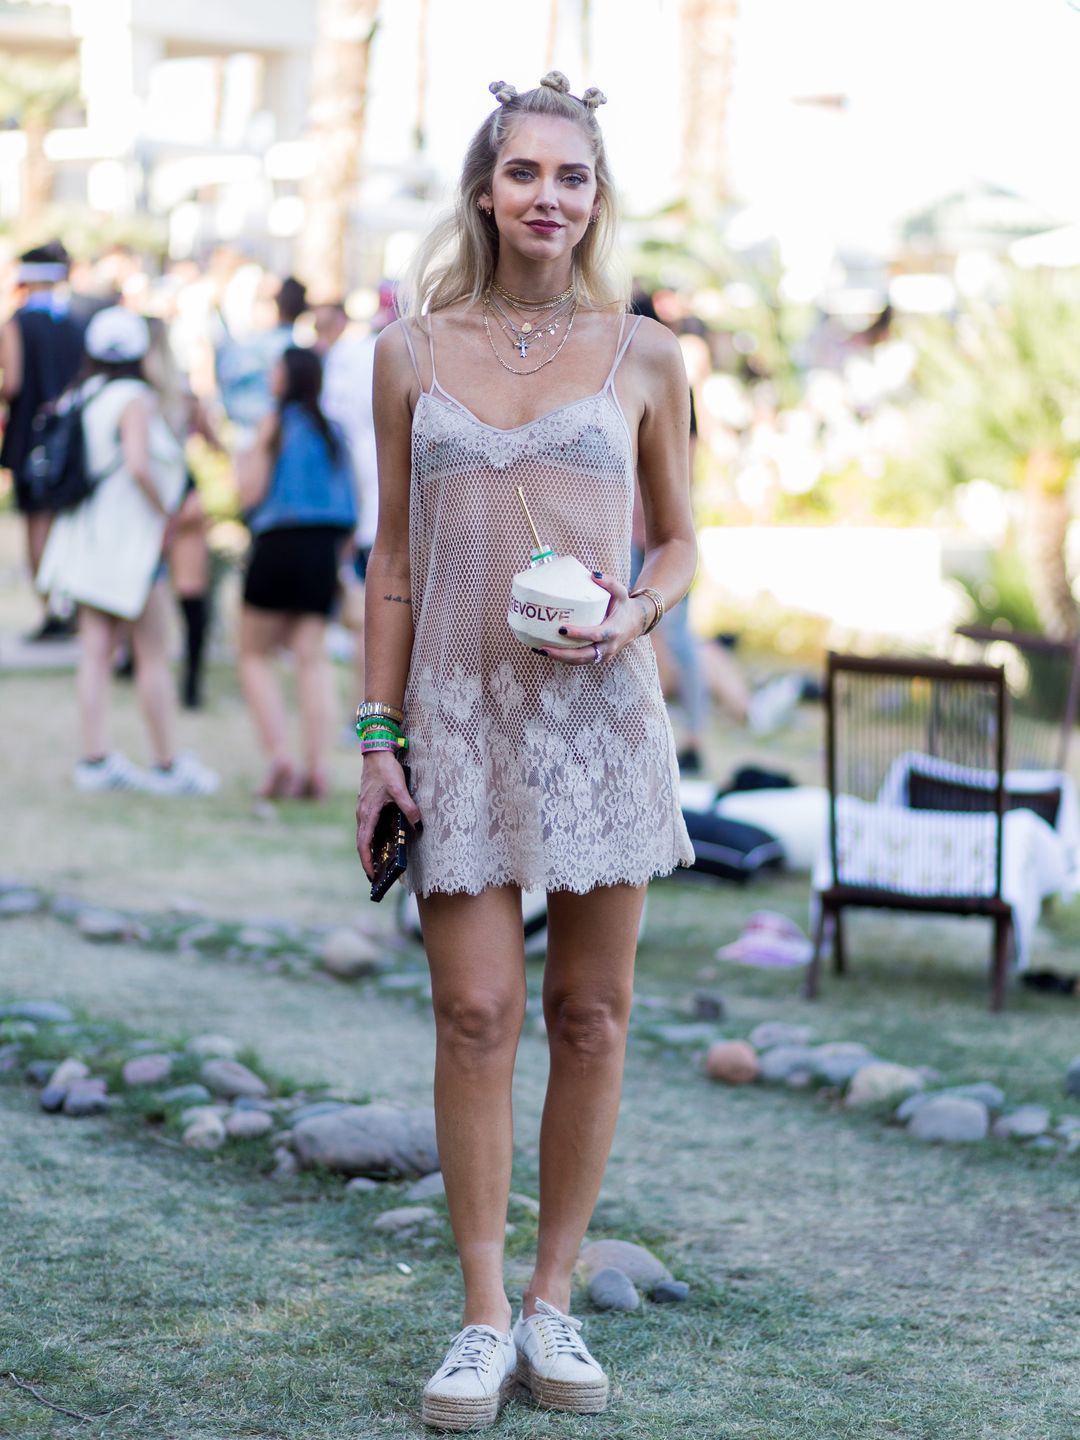 Chiara Ferragni wearing a sheer dress at the Revovle Festival during day 3 of the 2017 Coachella